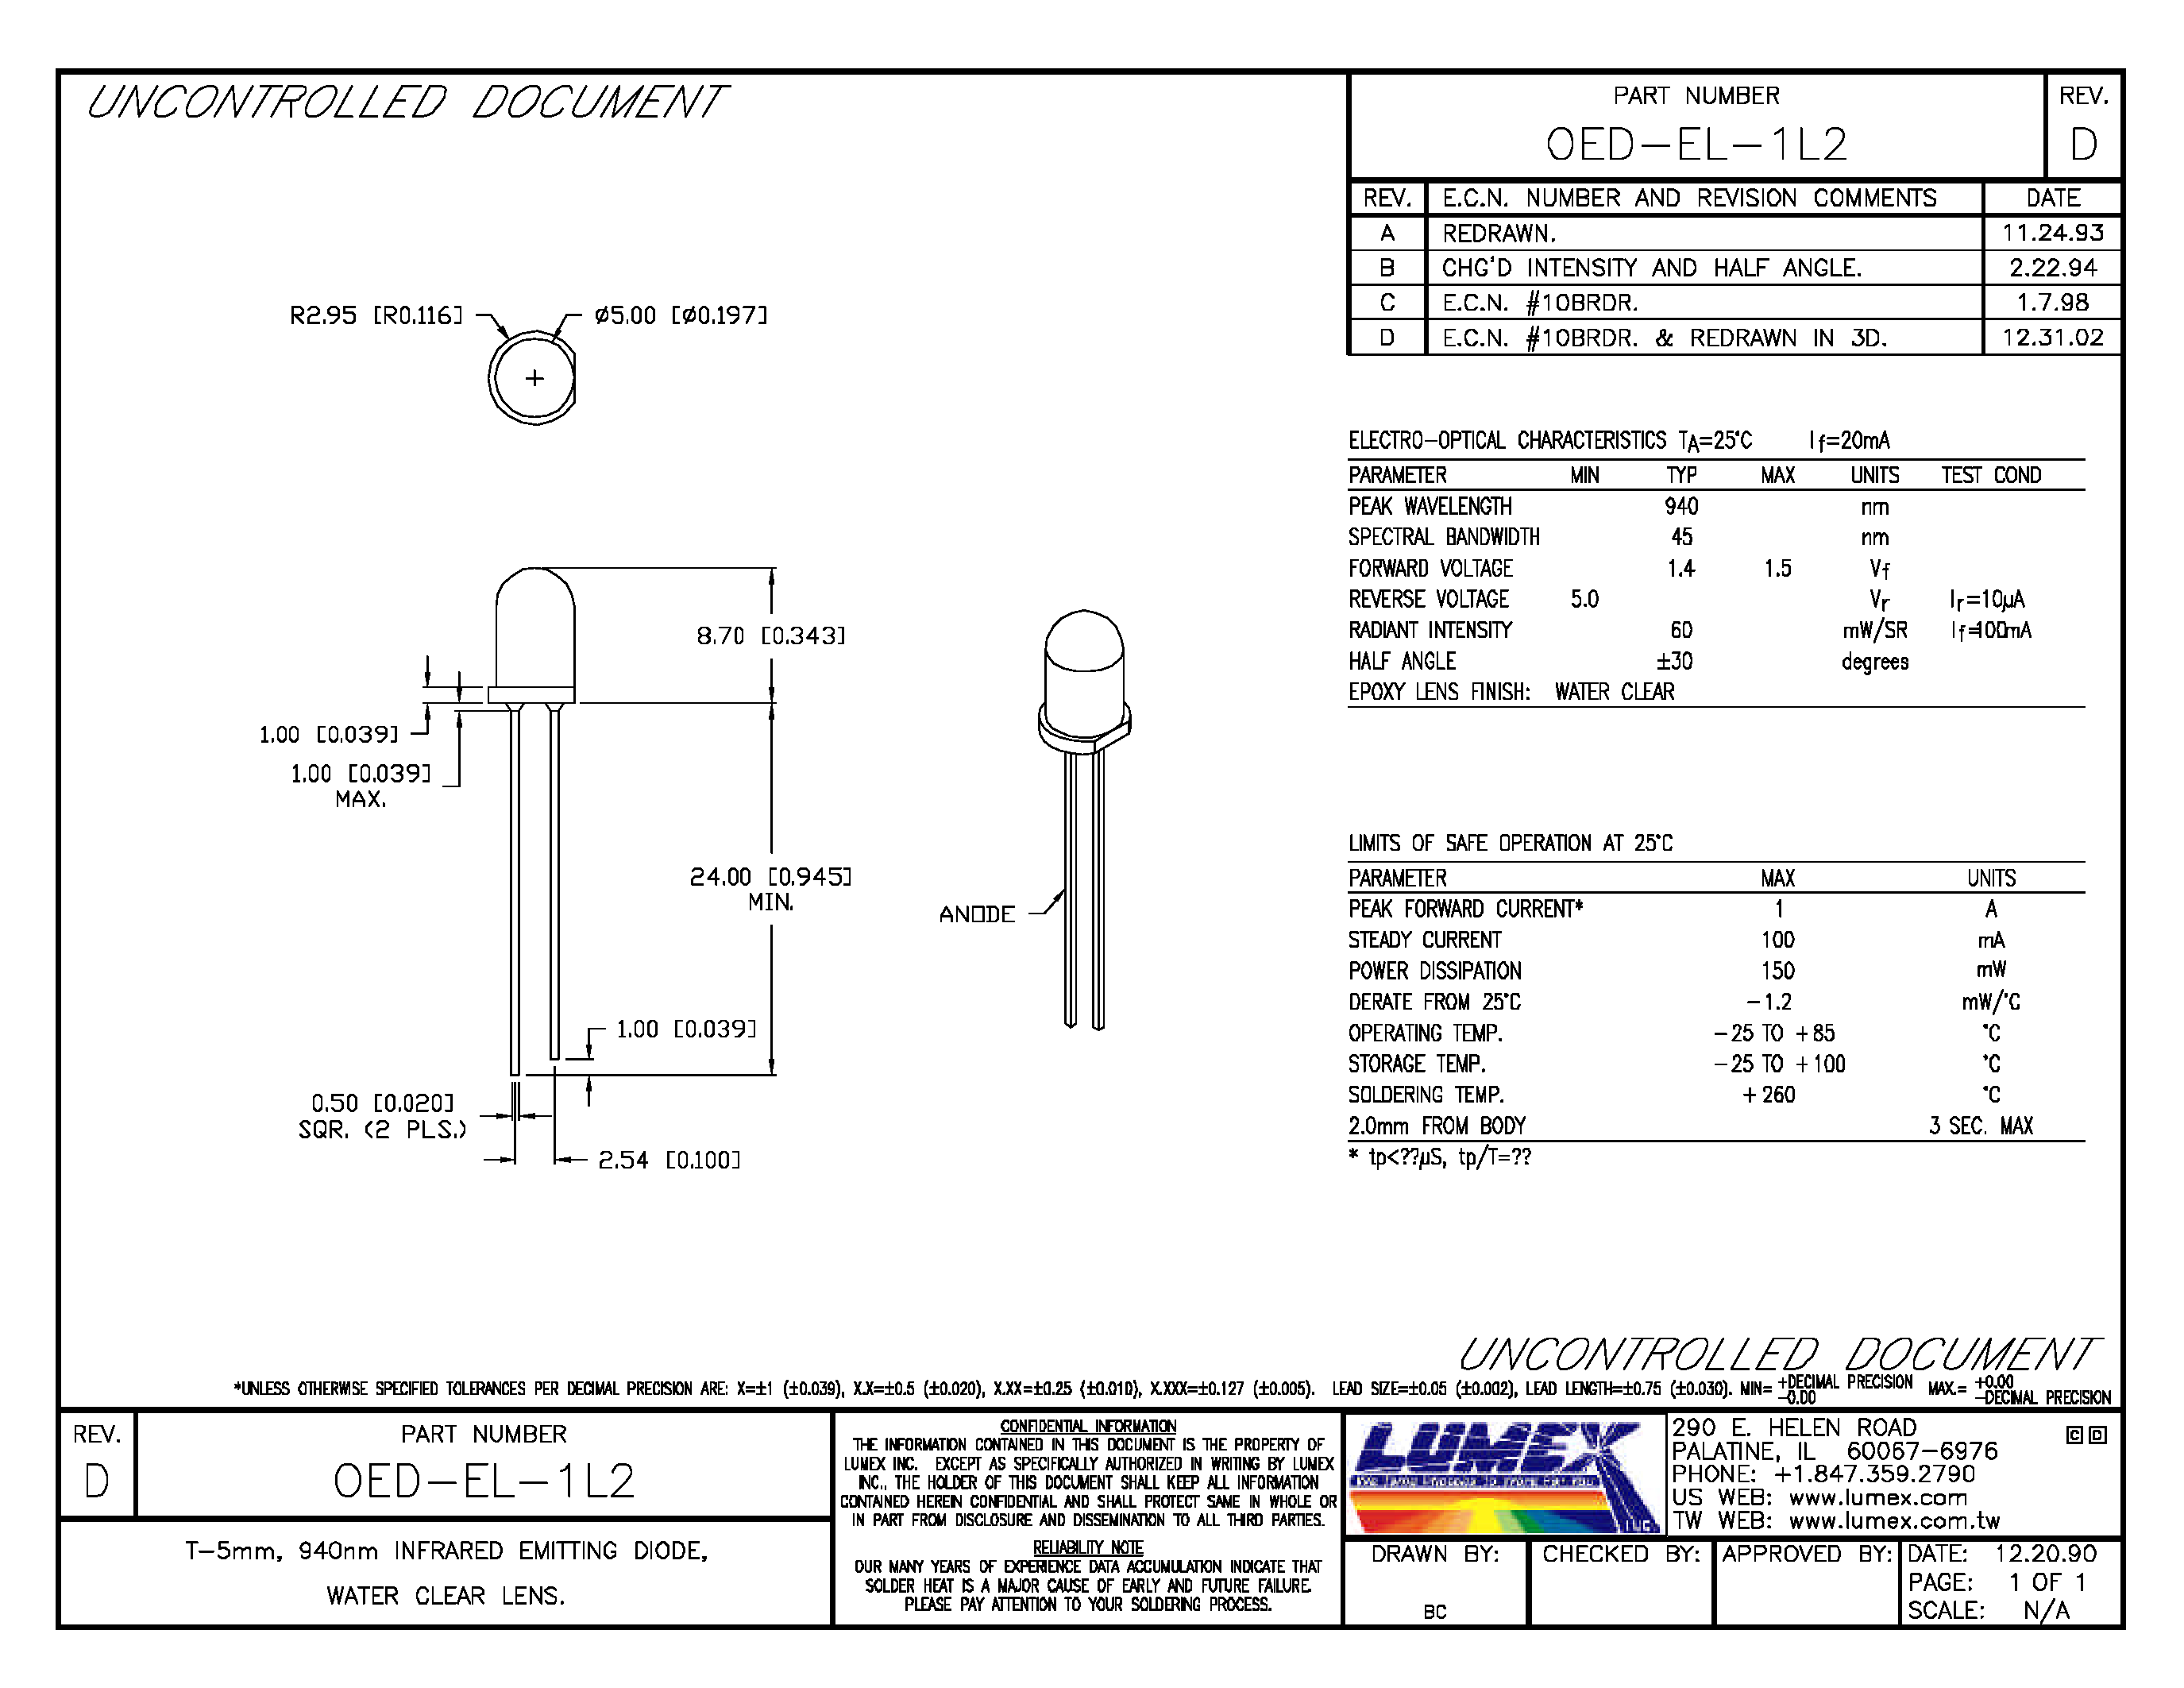 Datasheet OED-EL-1L2 - t-5mm / 940nm INFRARED EMITTING DIODE / WATER CLEAR LENS page 1